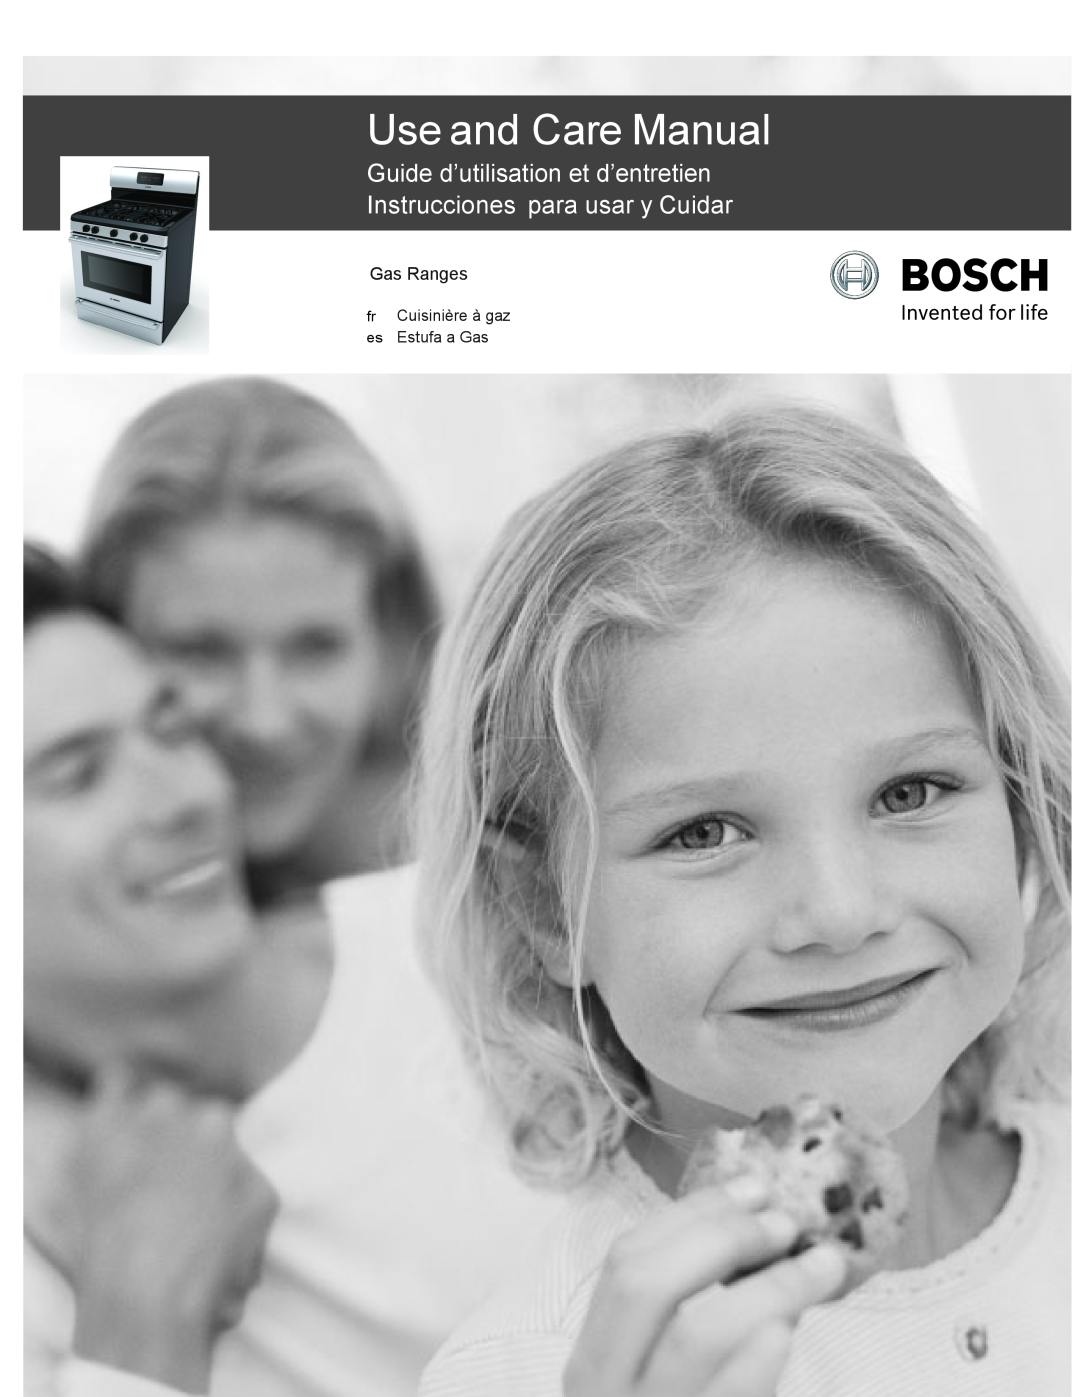 Bosch Appliances HGS3053UC manual Use and Care Manual, Electric Ranges Gas Ranges 